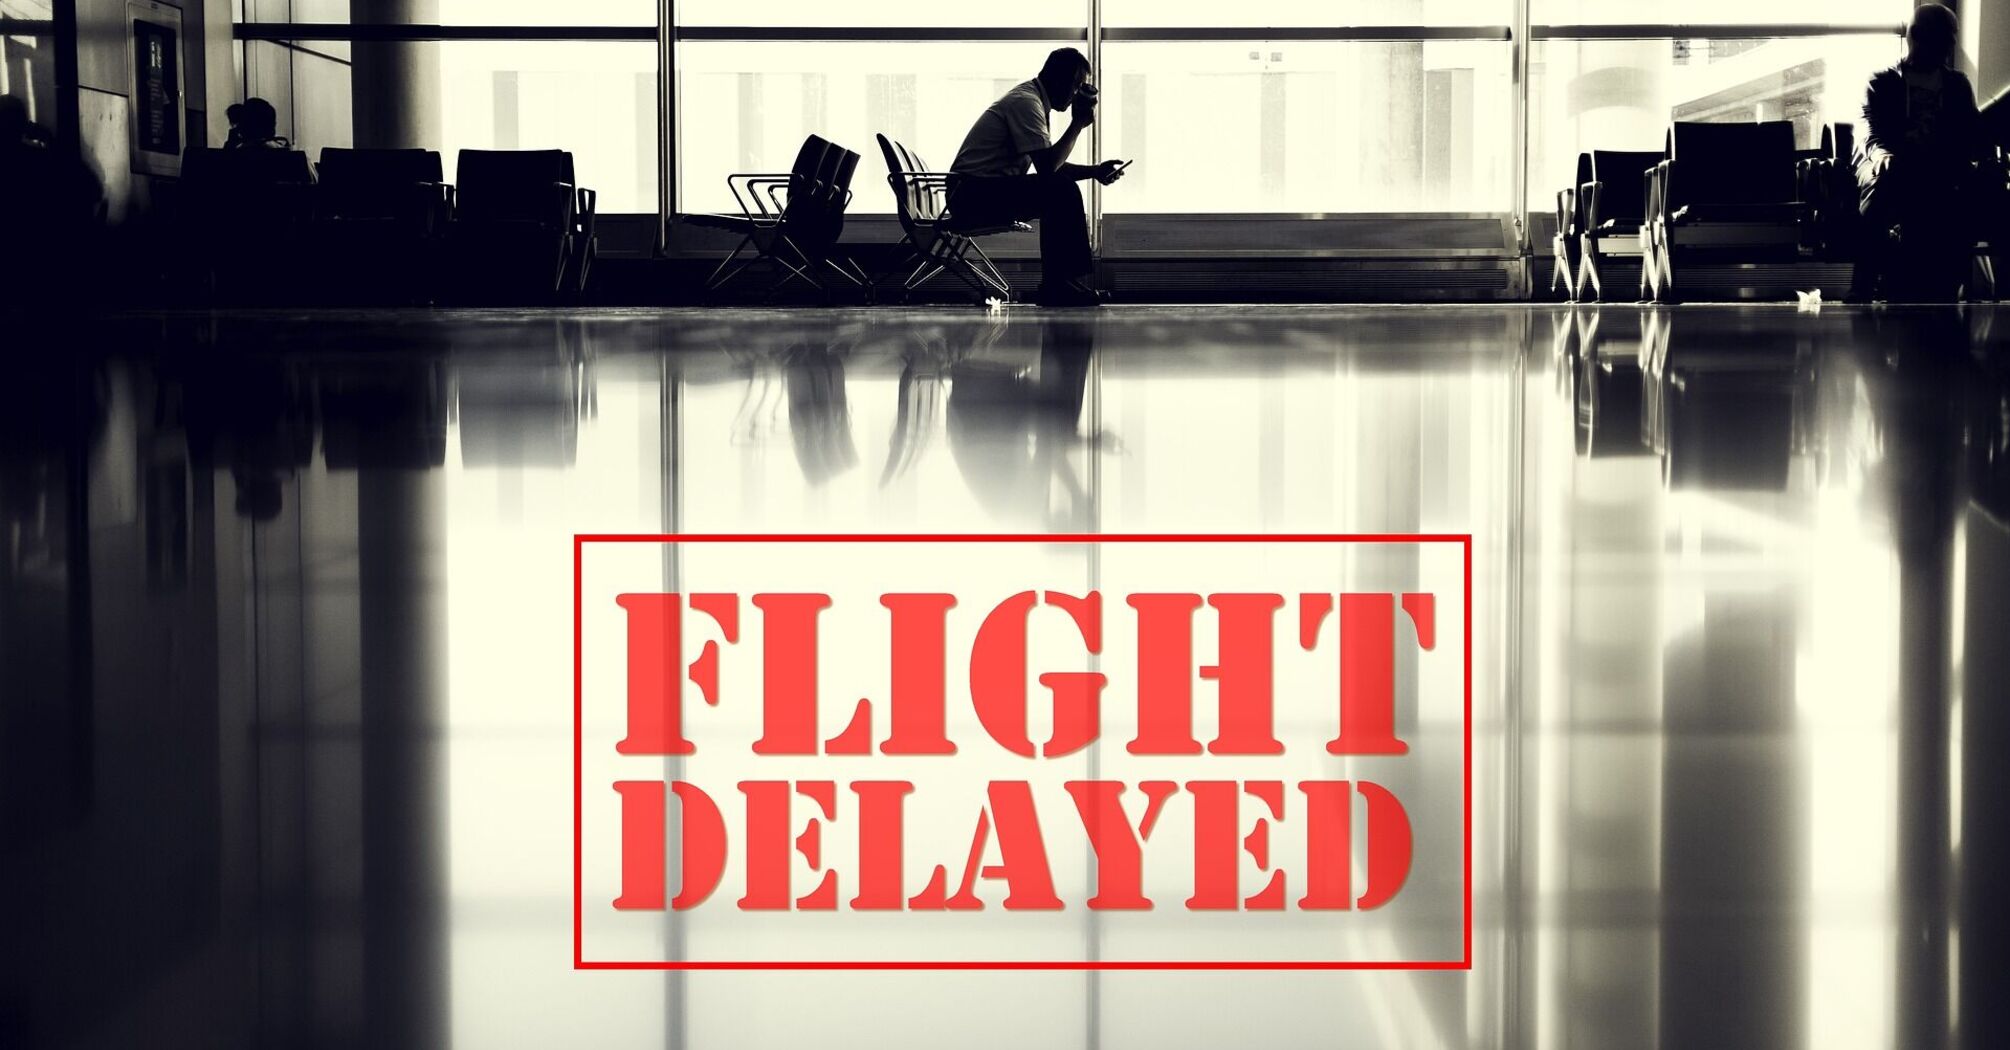 Silhouette of a person sitting in an airport terminal with the text 'FLIGHT DELAYED' overlaid